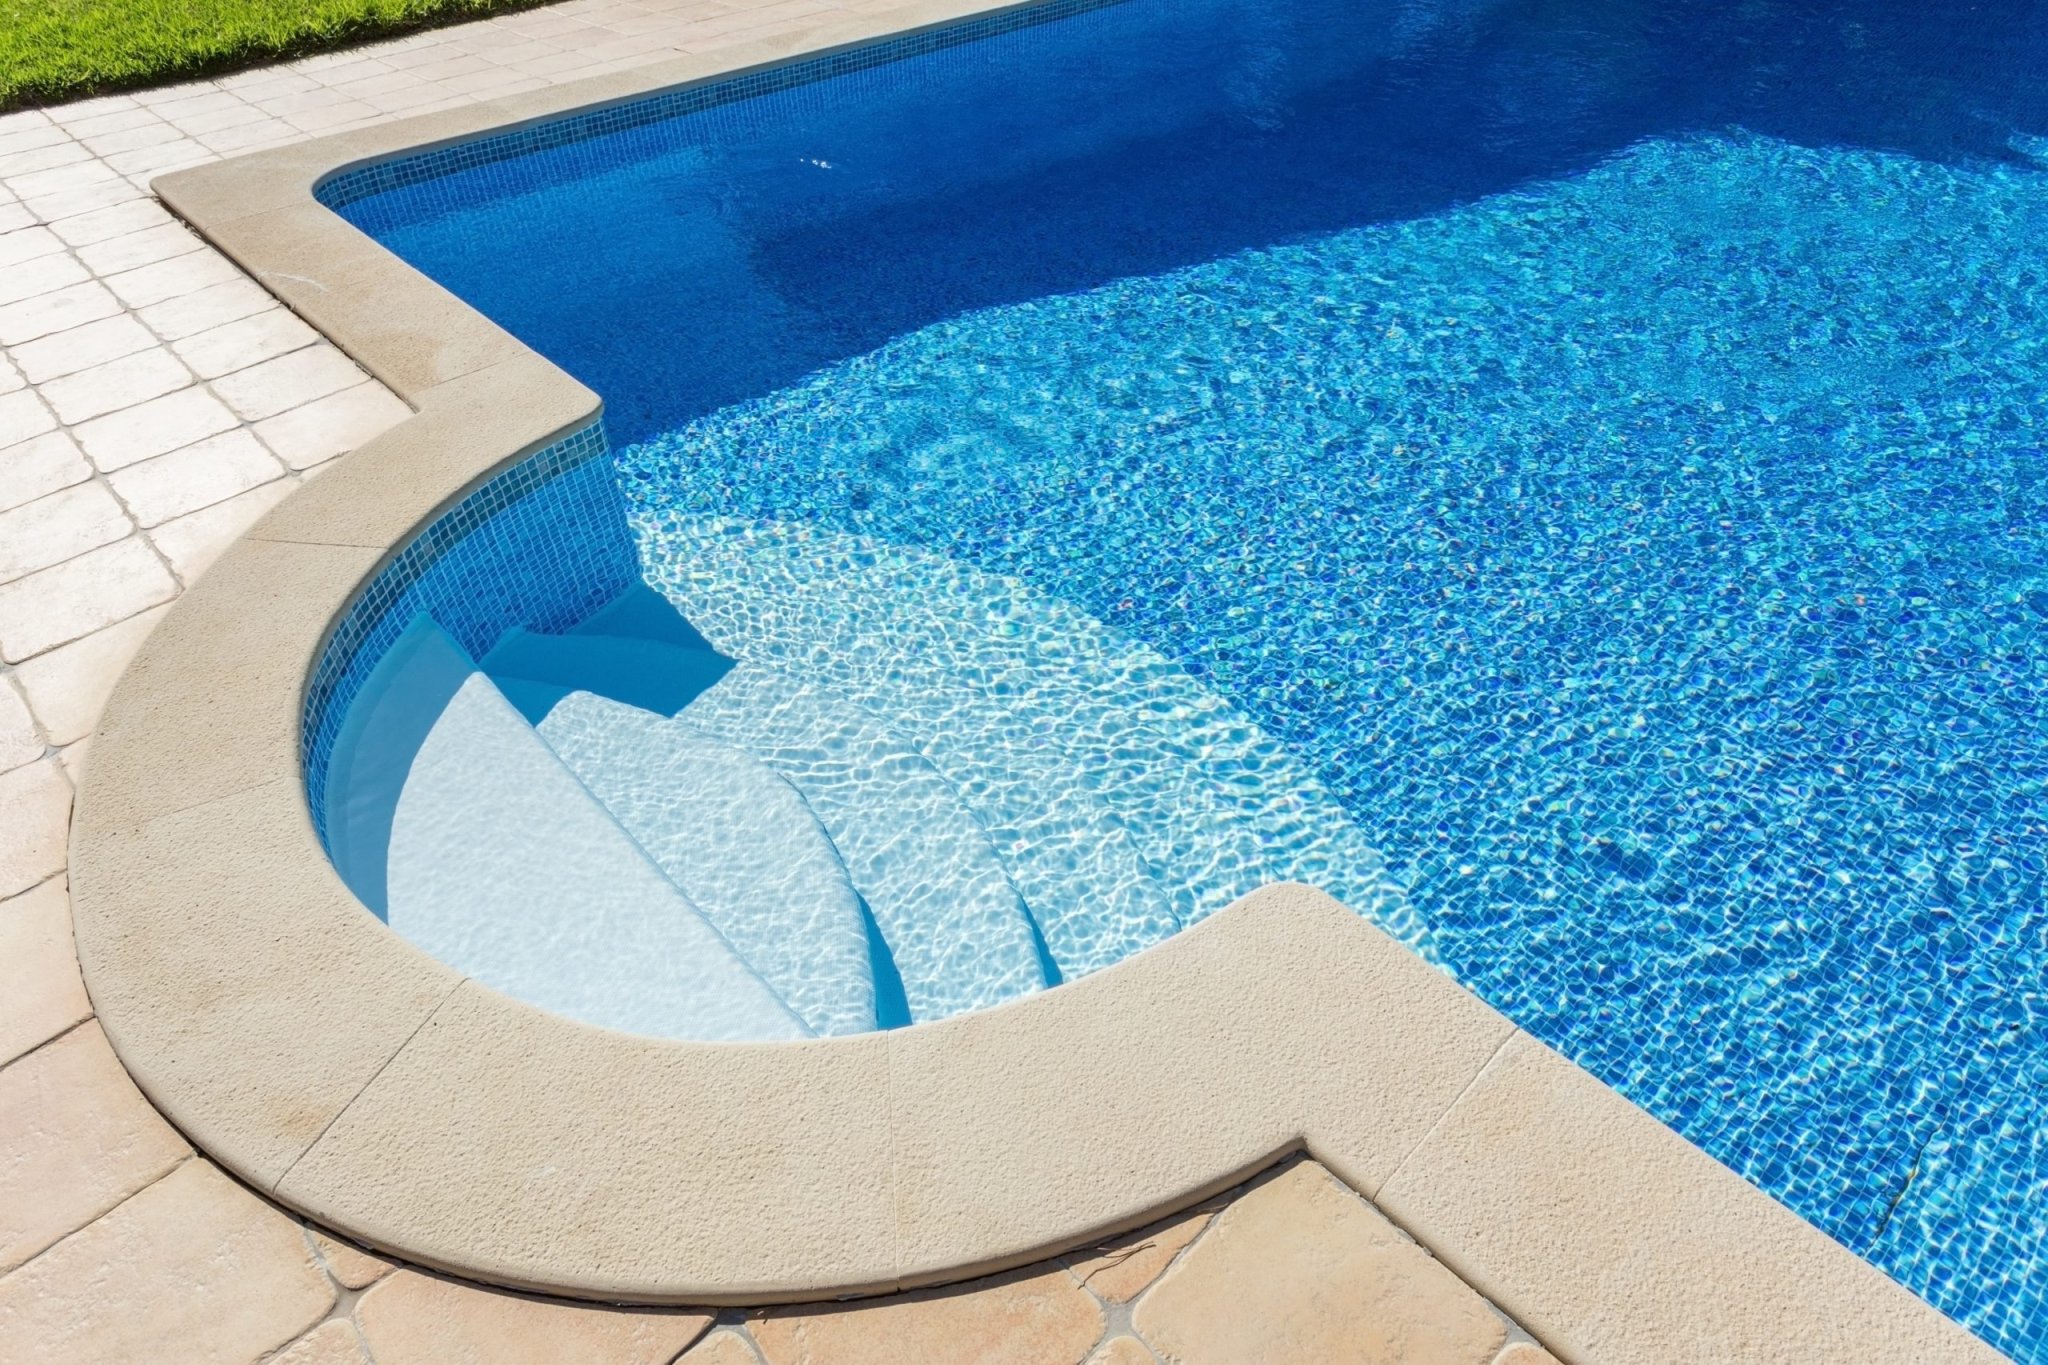 Can’t Find Chlorine for Your Pool? Try This Instead